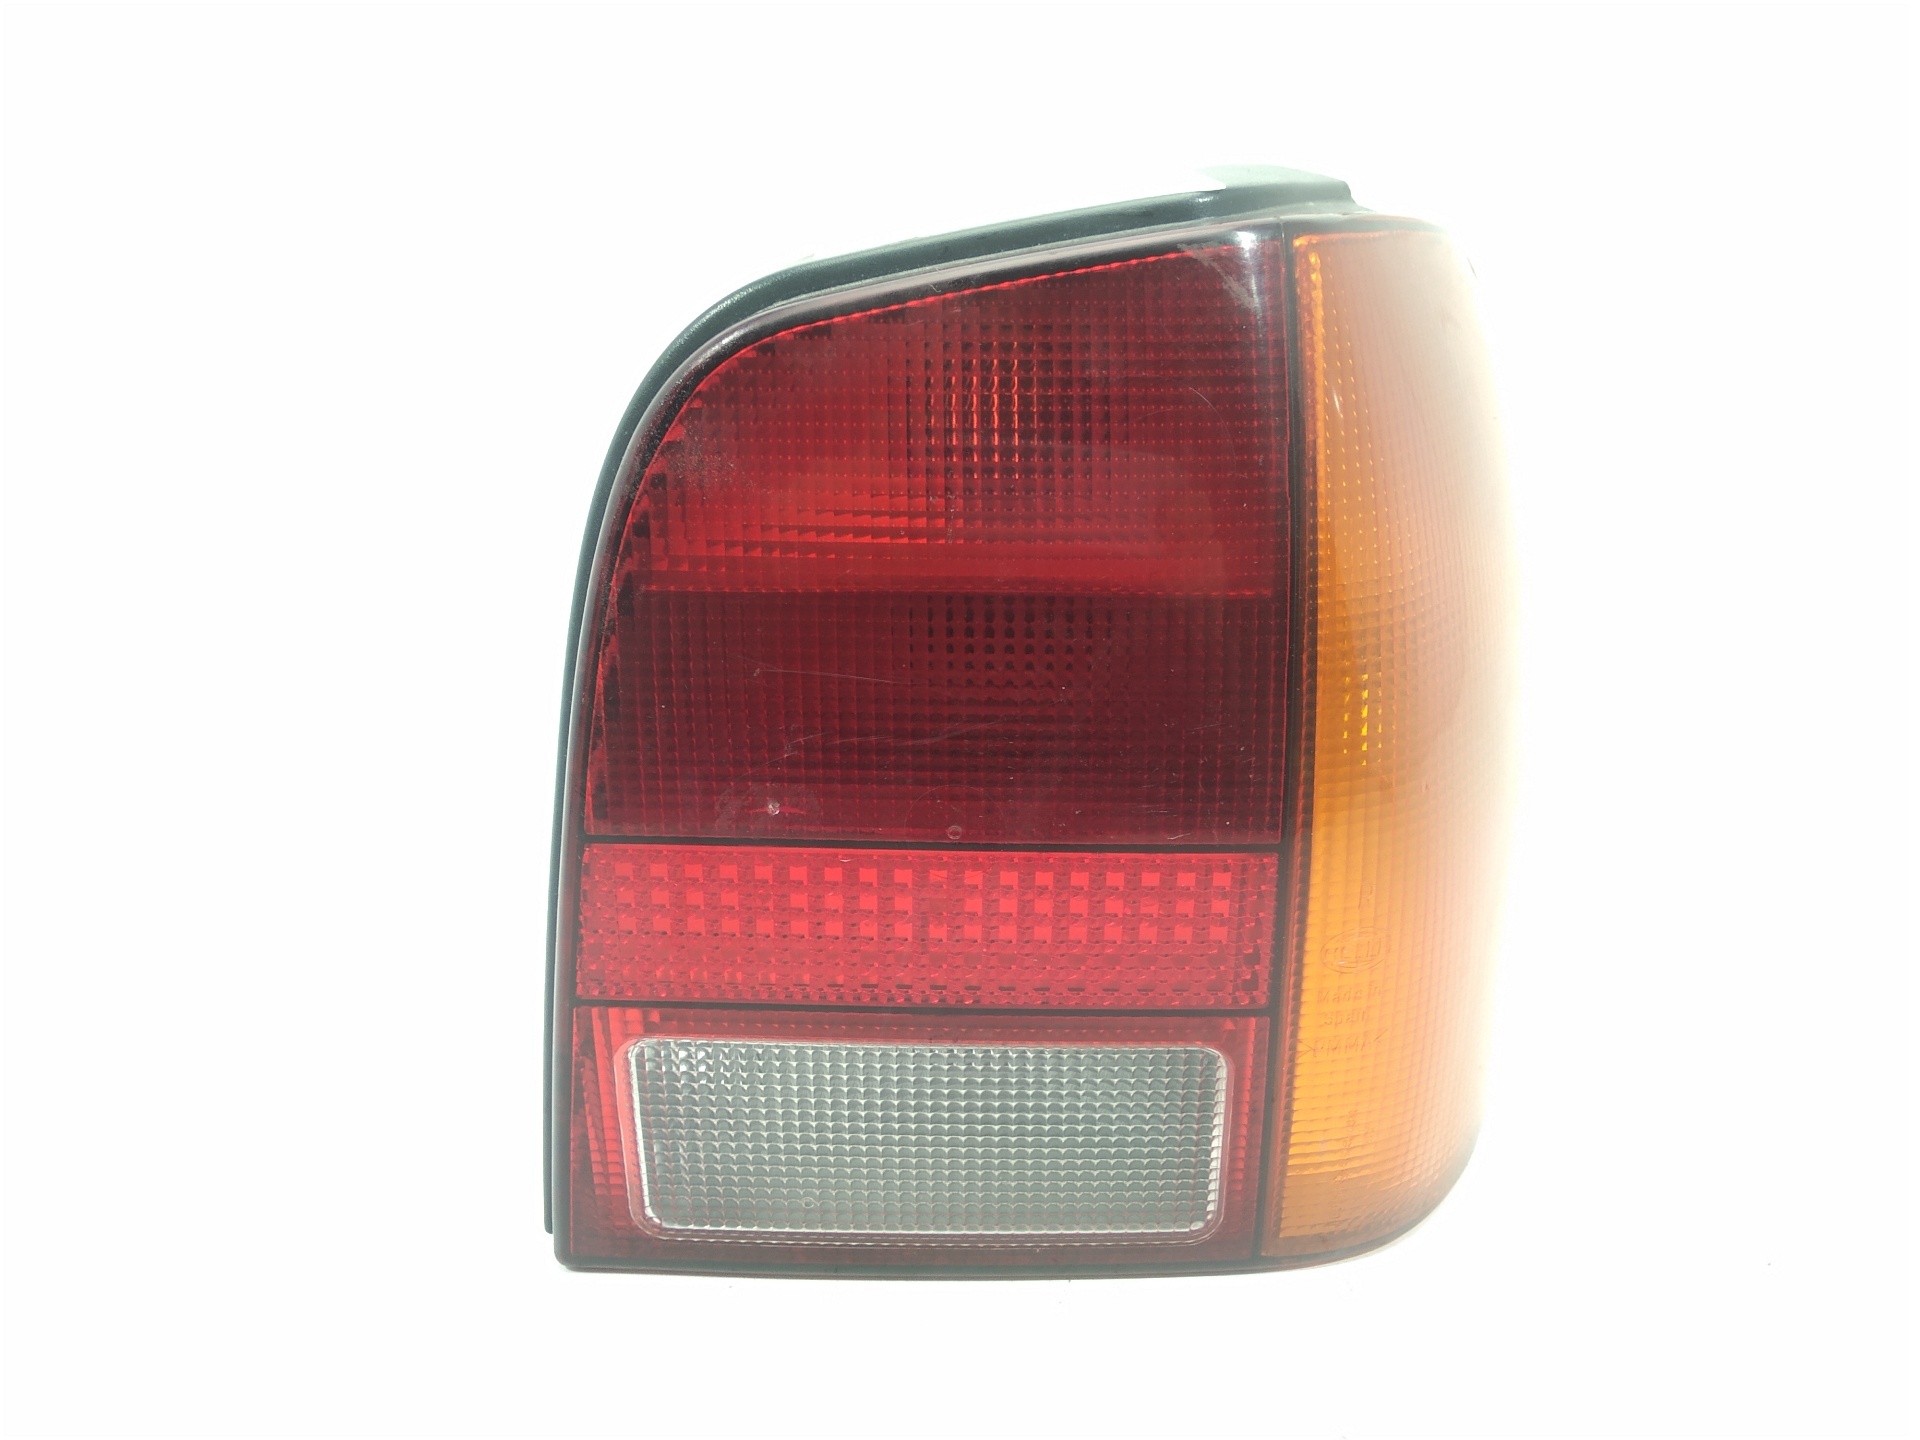 VOLKSWAGEN Polo 3 generation (1994-2002) Rear Right Taillight Lamp 6N0945096, 6N0945096, 6N0945096 24019134